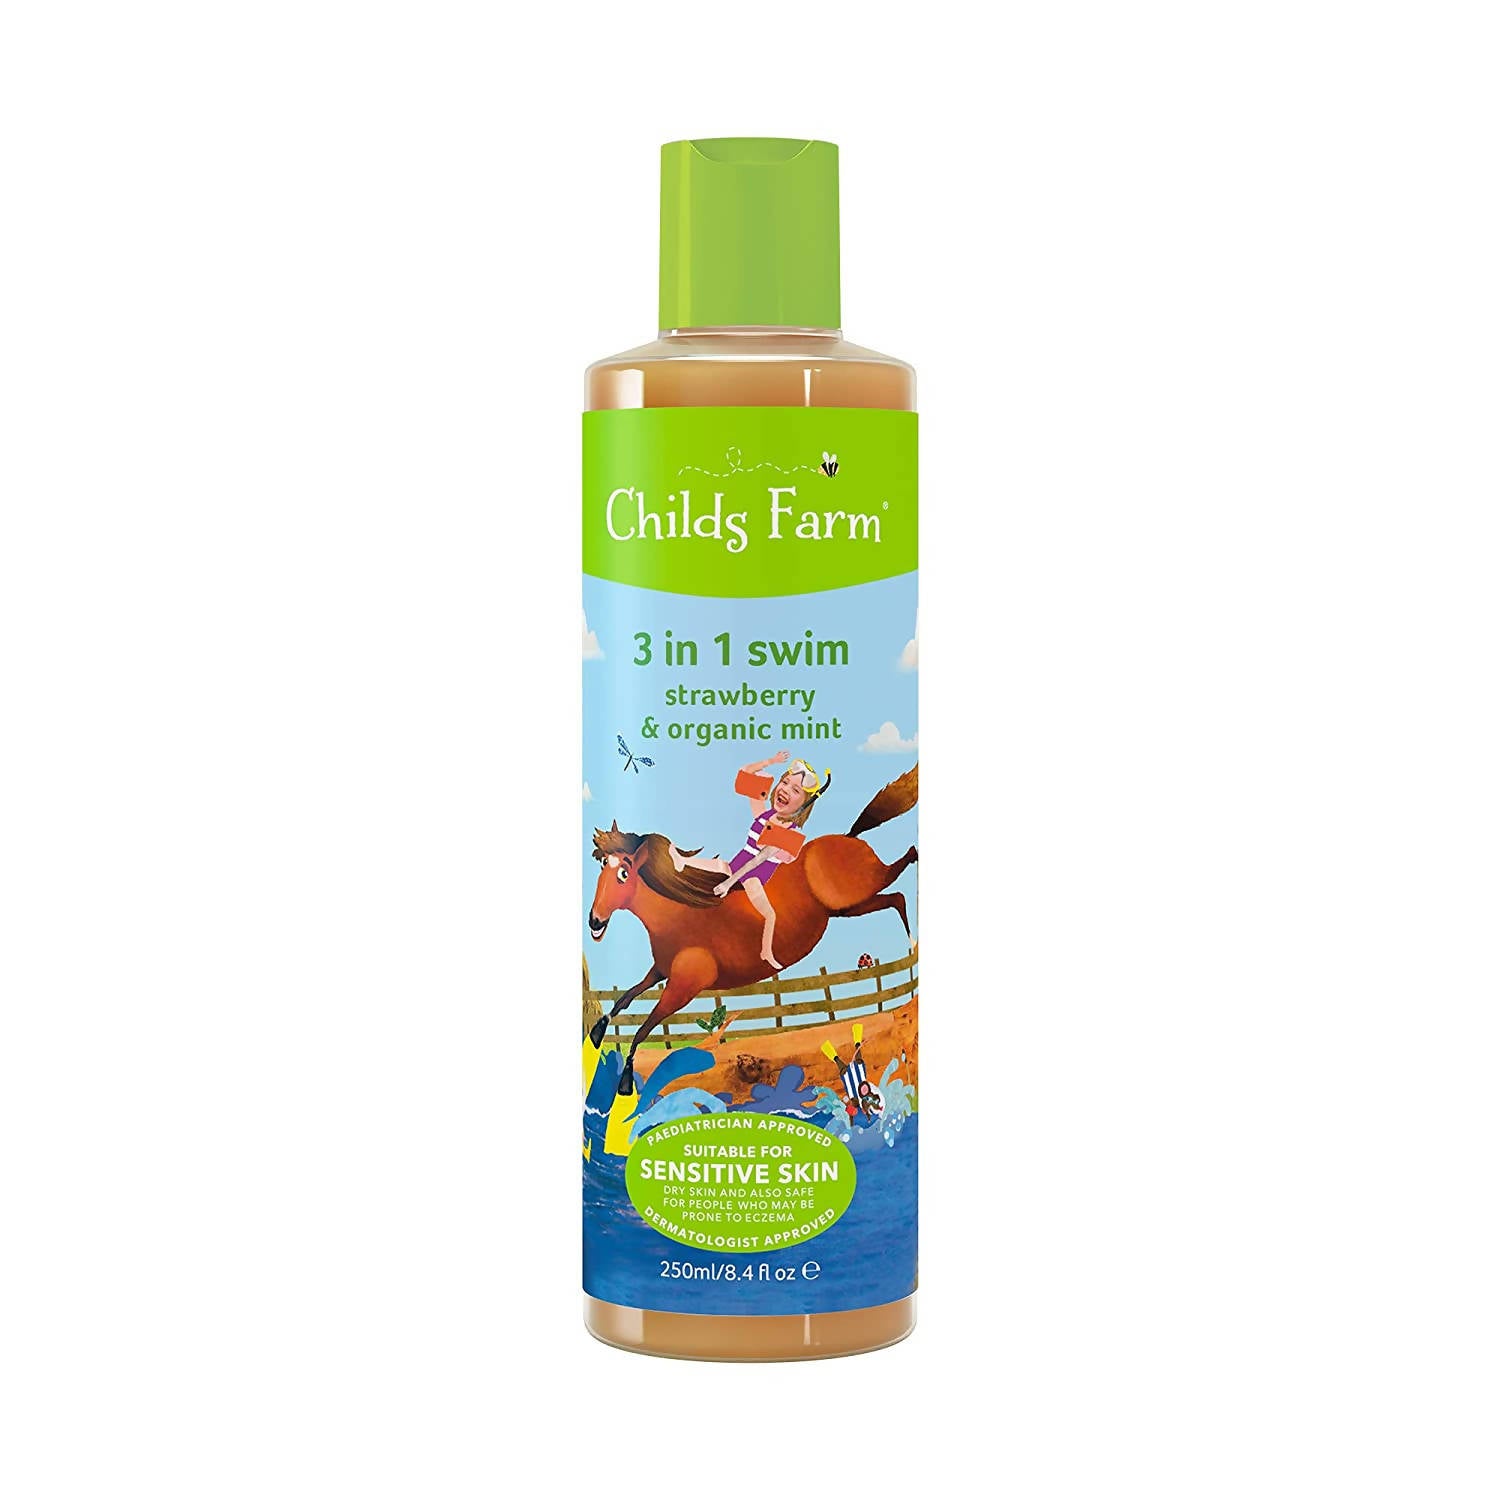 Childs Farm 3 in 1 Strawberry Mint After Swim Care Wash 250ml